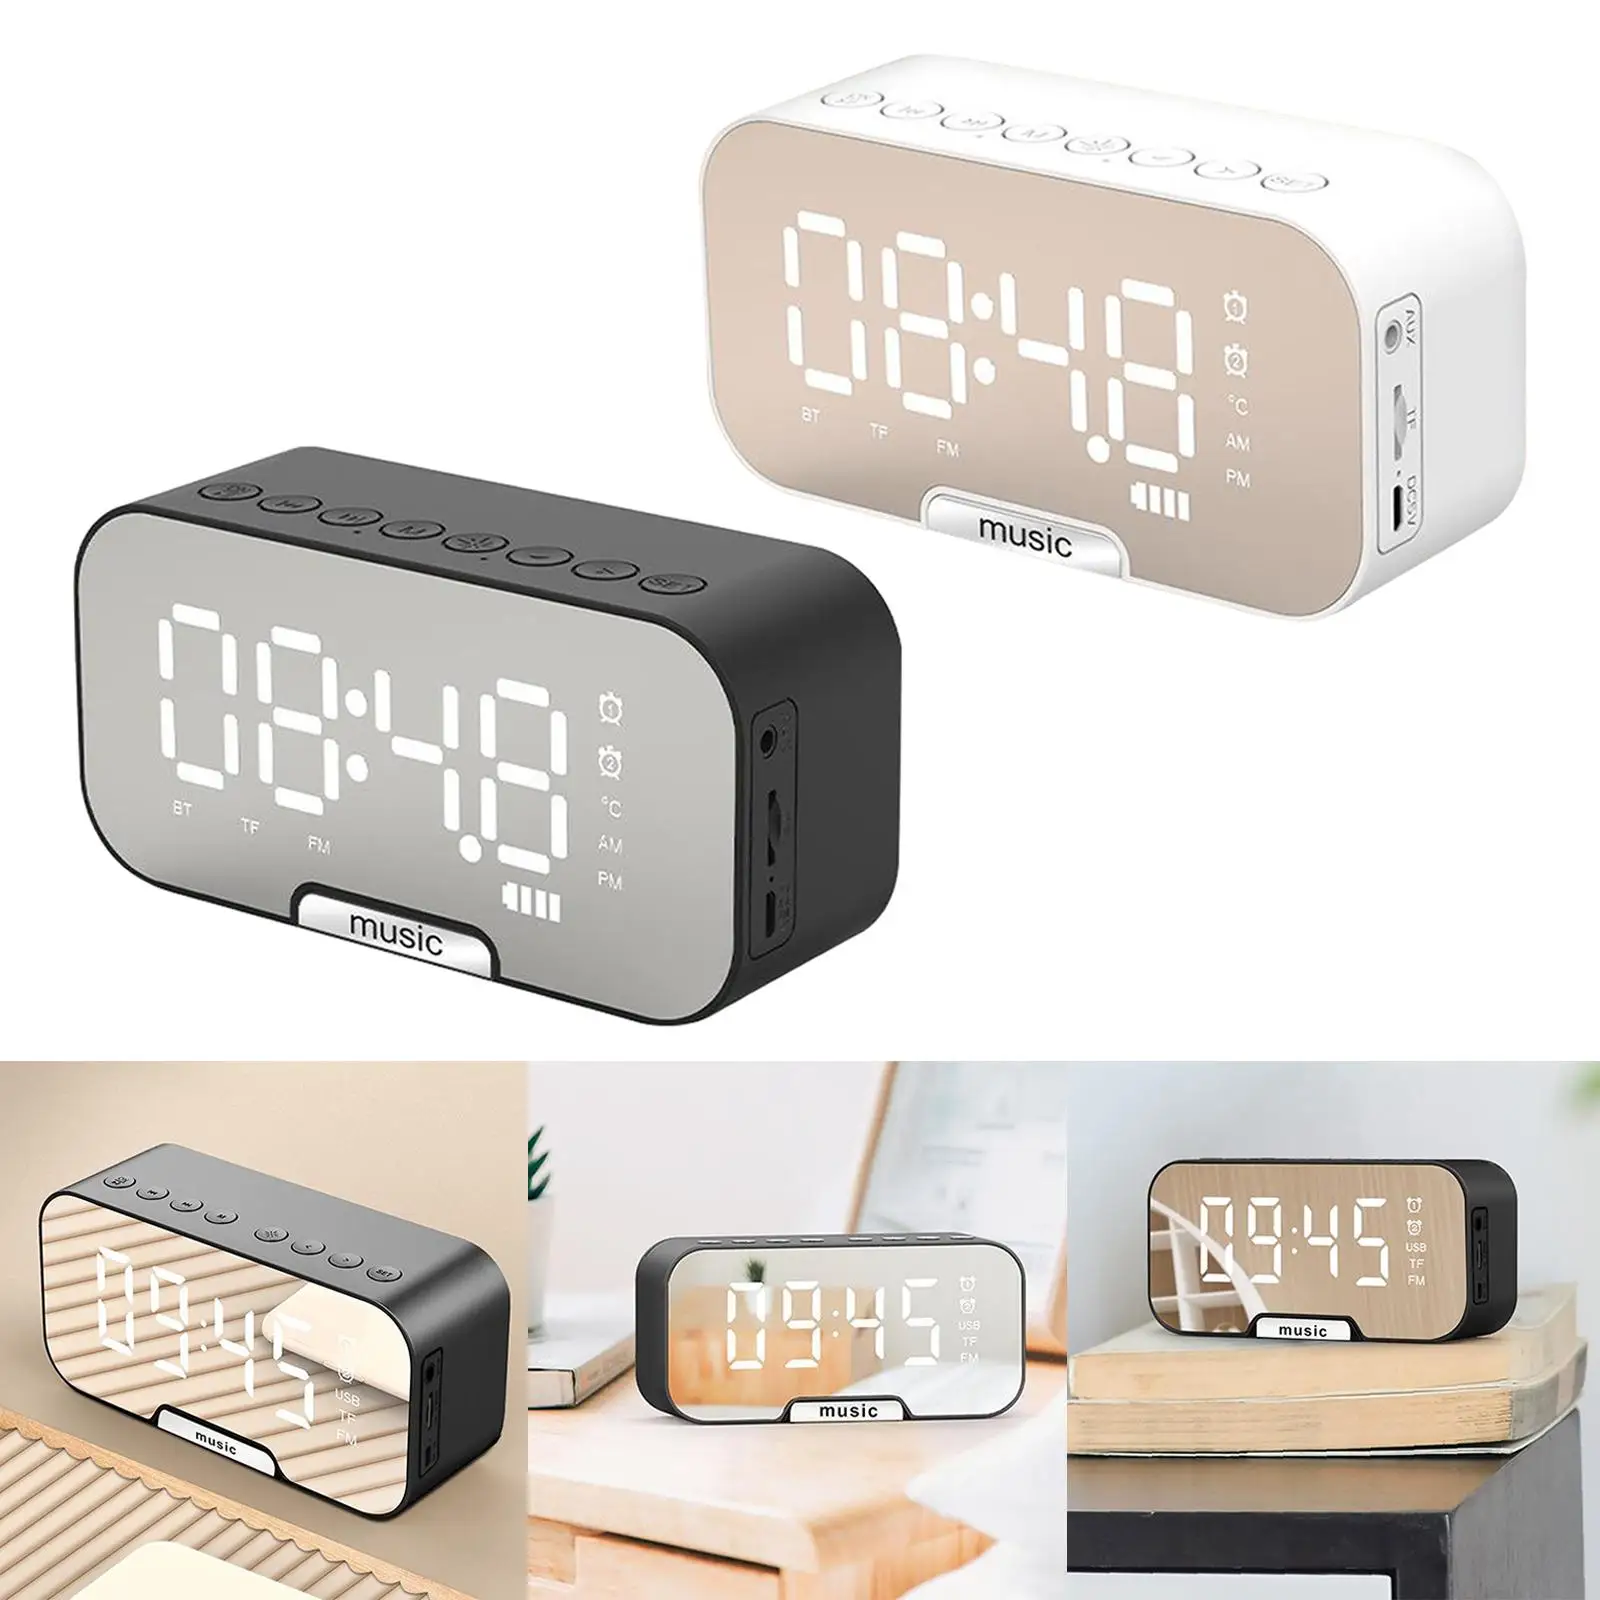 2Pcs  Speaker  for Bedroom Alarms Loud LED Big Display Clock with USB Charging Port, Adjustable Volume, Dimmable, Snooze